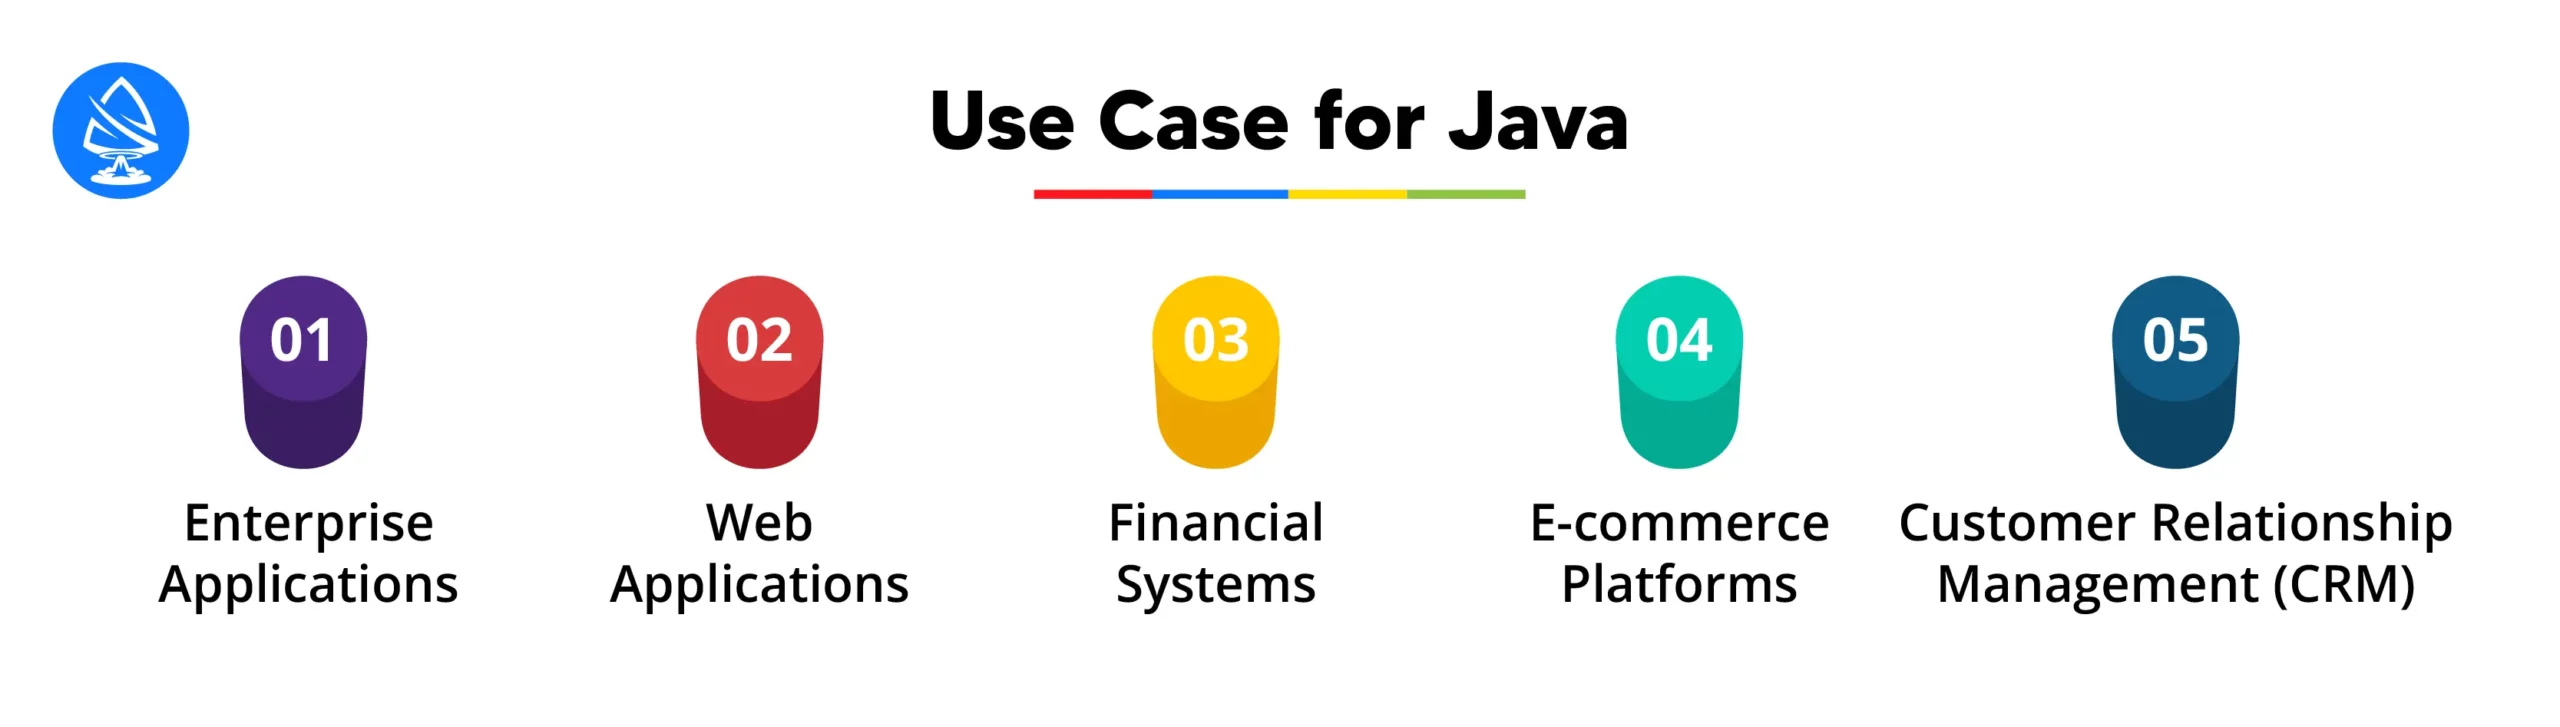 Typical Use Cases for Java in Backend Development 